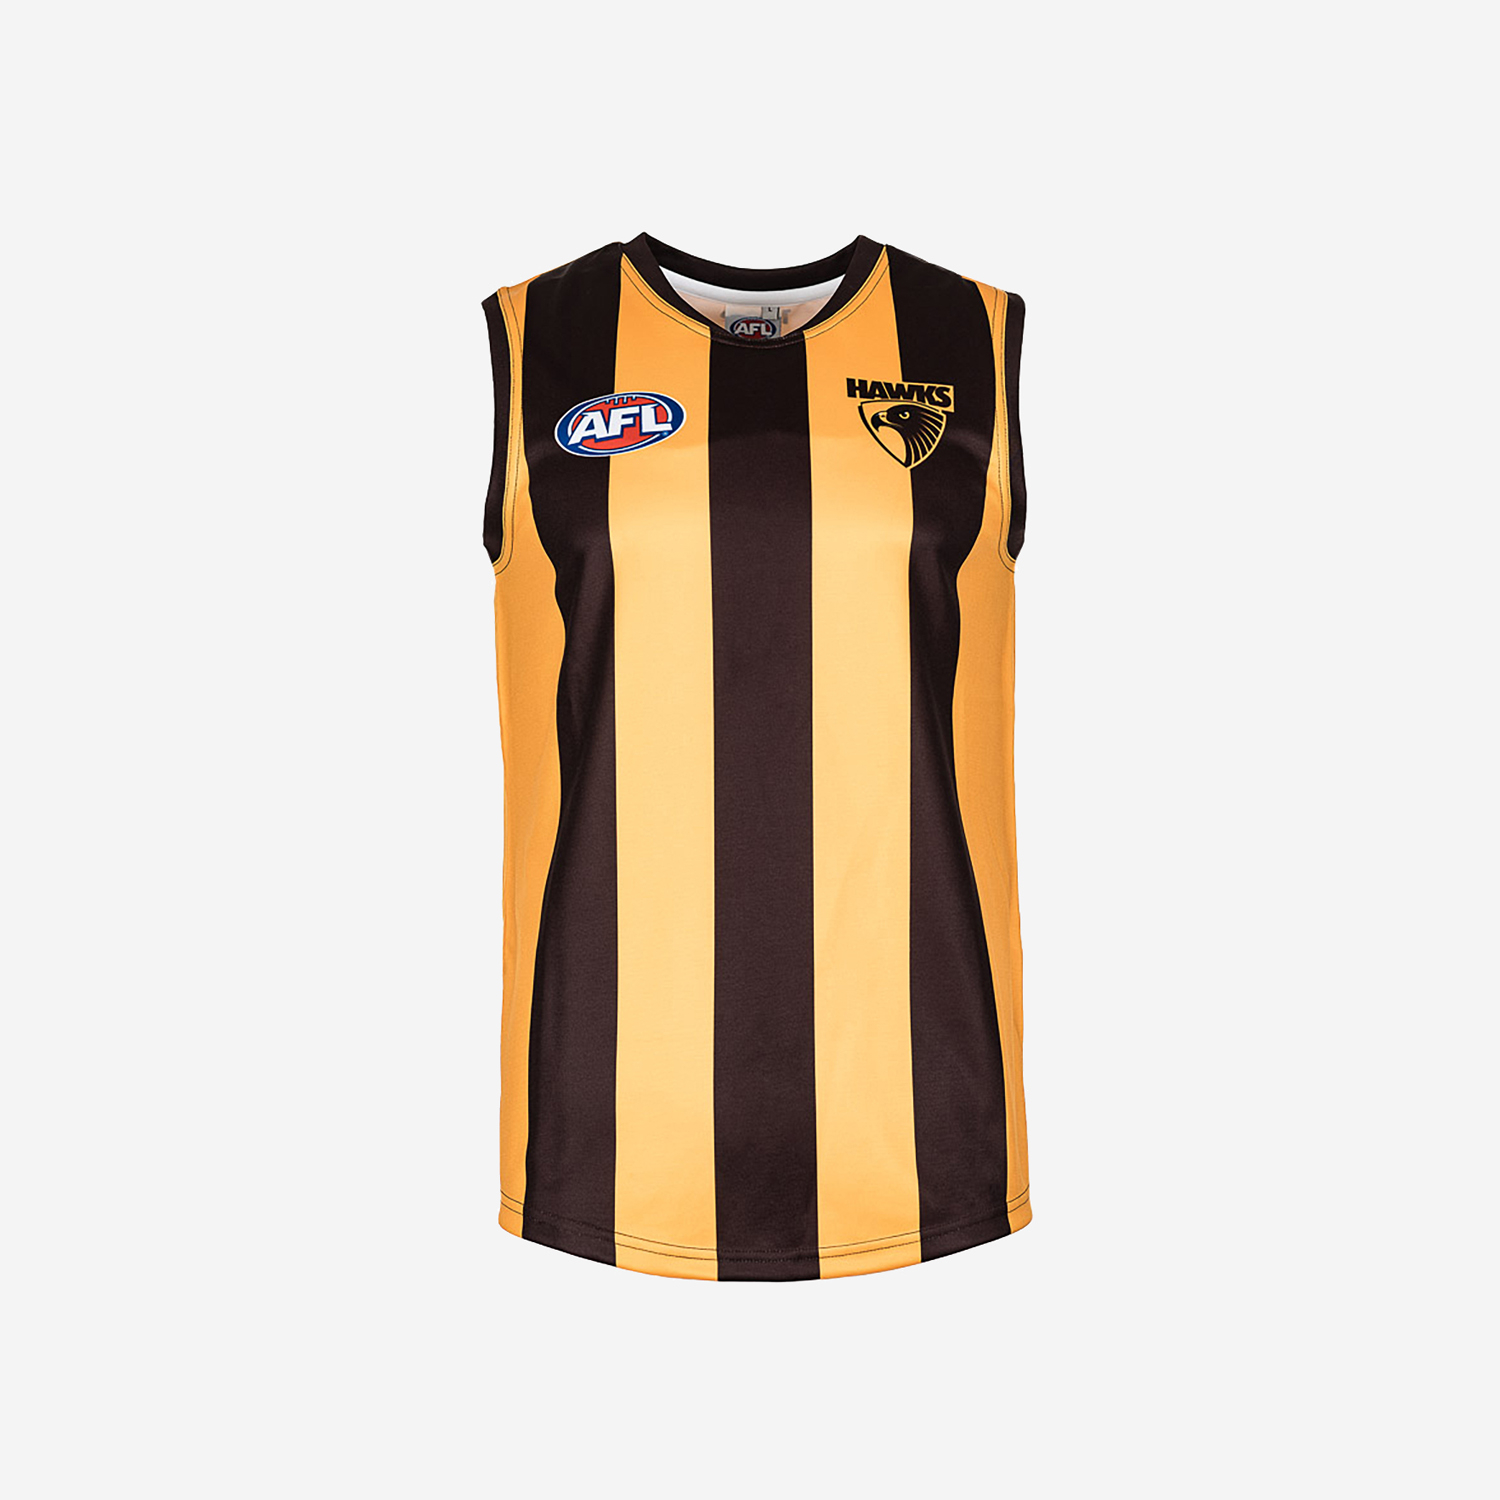 Hawthorn Youth Guernsey